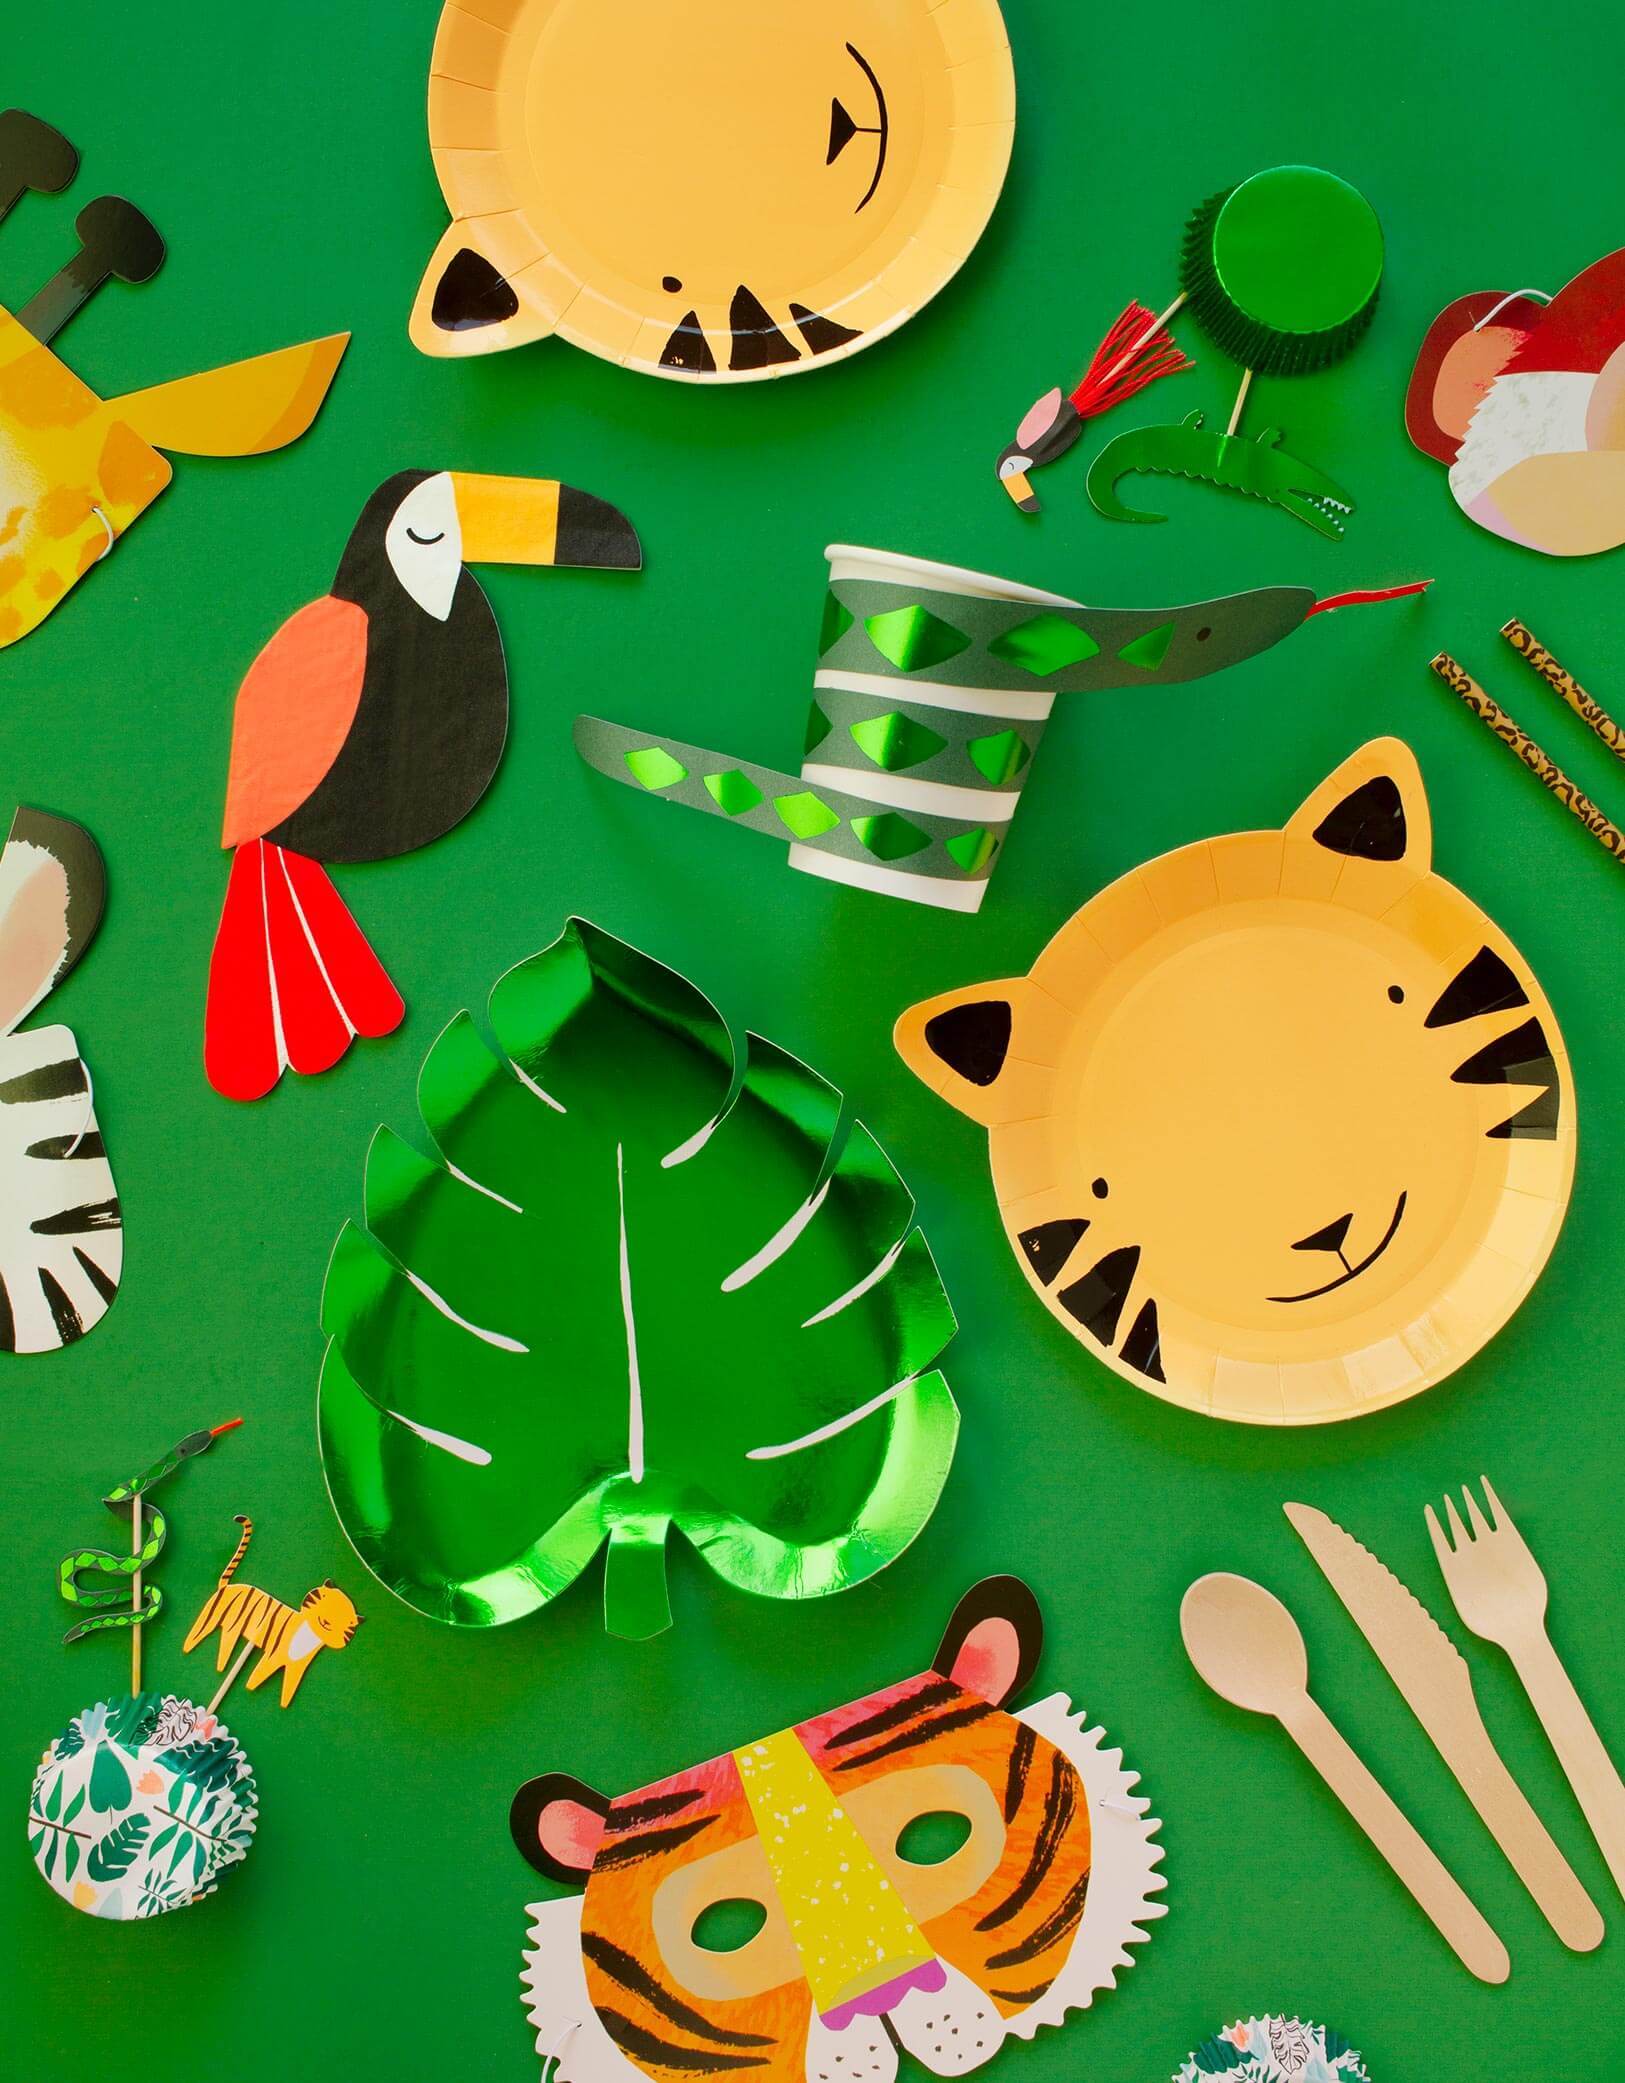 Meri Meri Party wares of Green Palm Leaf shaped Foil Paper Plate, Tiger paper plate, Toucan Napkin, Snake cup, Safari animal cupcake toper with green foil cupcake sleeve, Animal party masks